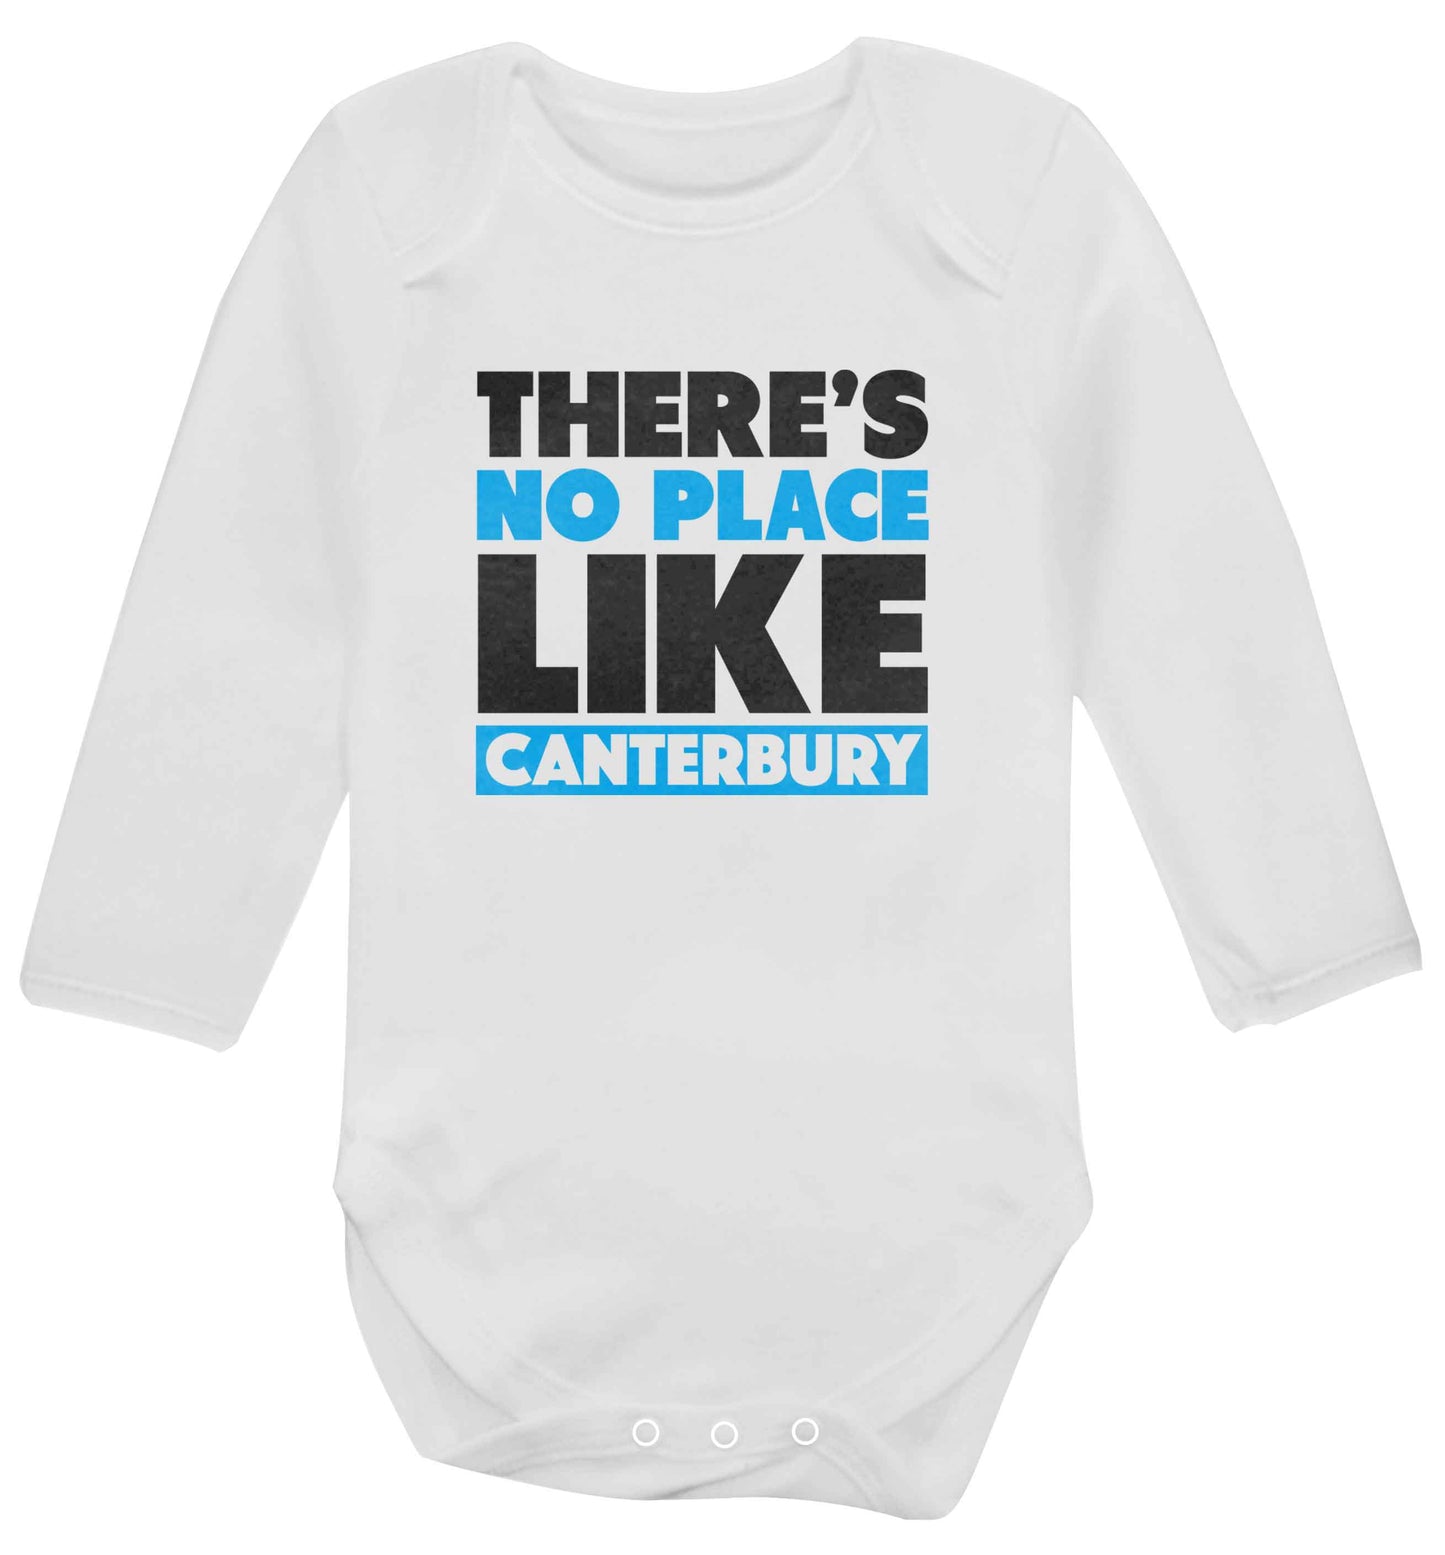 There's no place like Canterbury baby vest long sleeved white 6-12 months